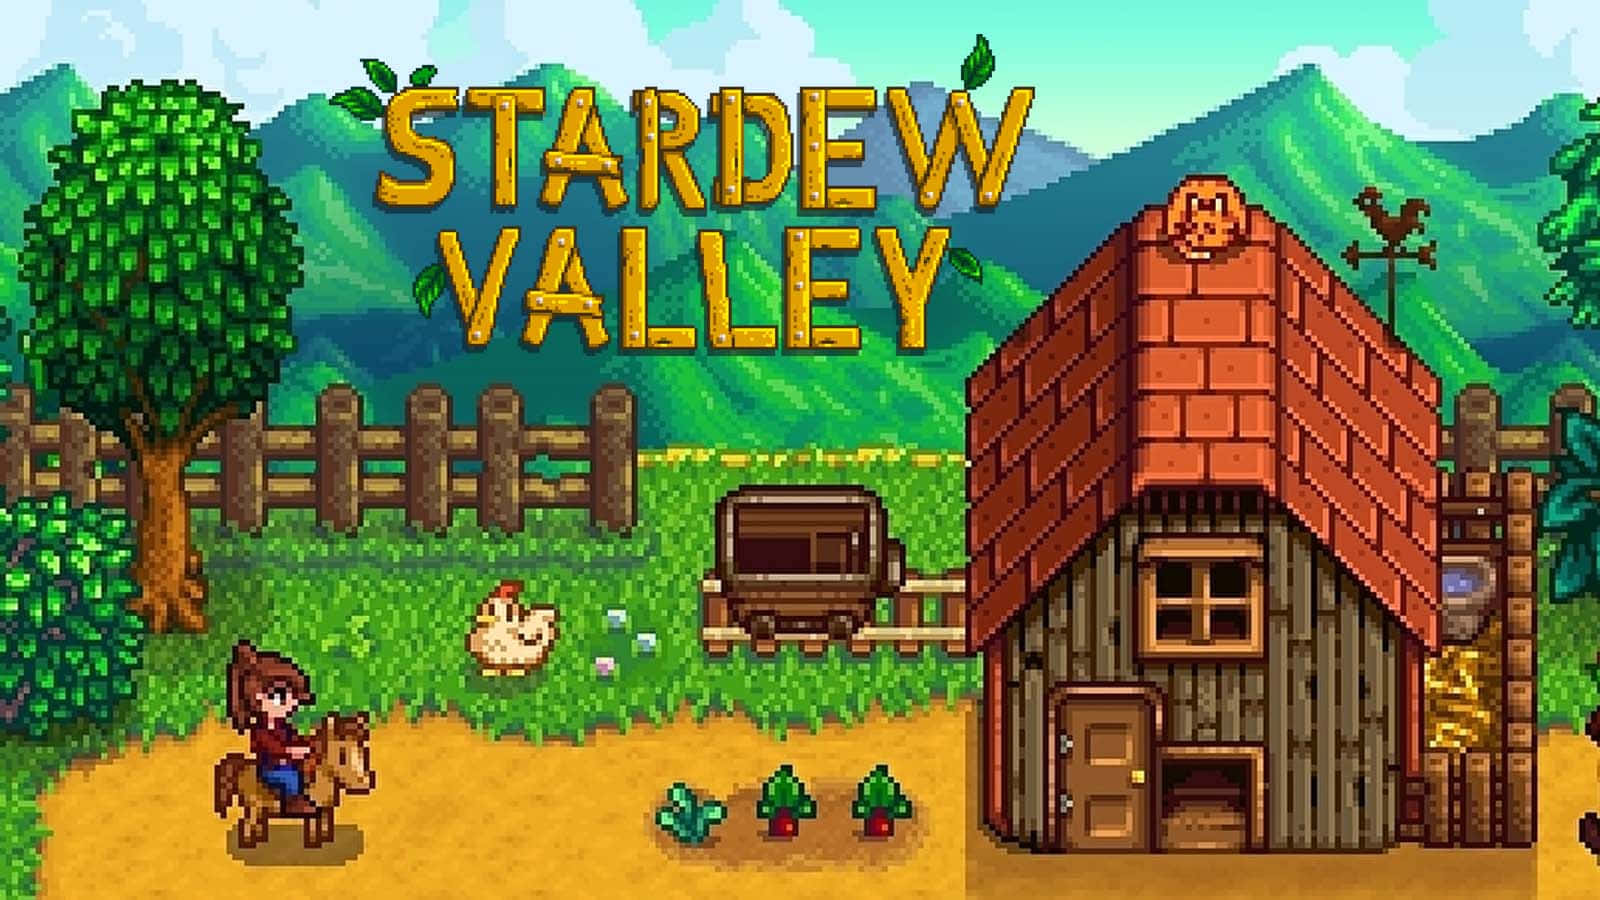 Experience the peaceful moments in Stardew Valley